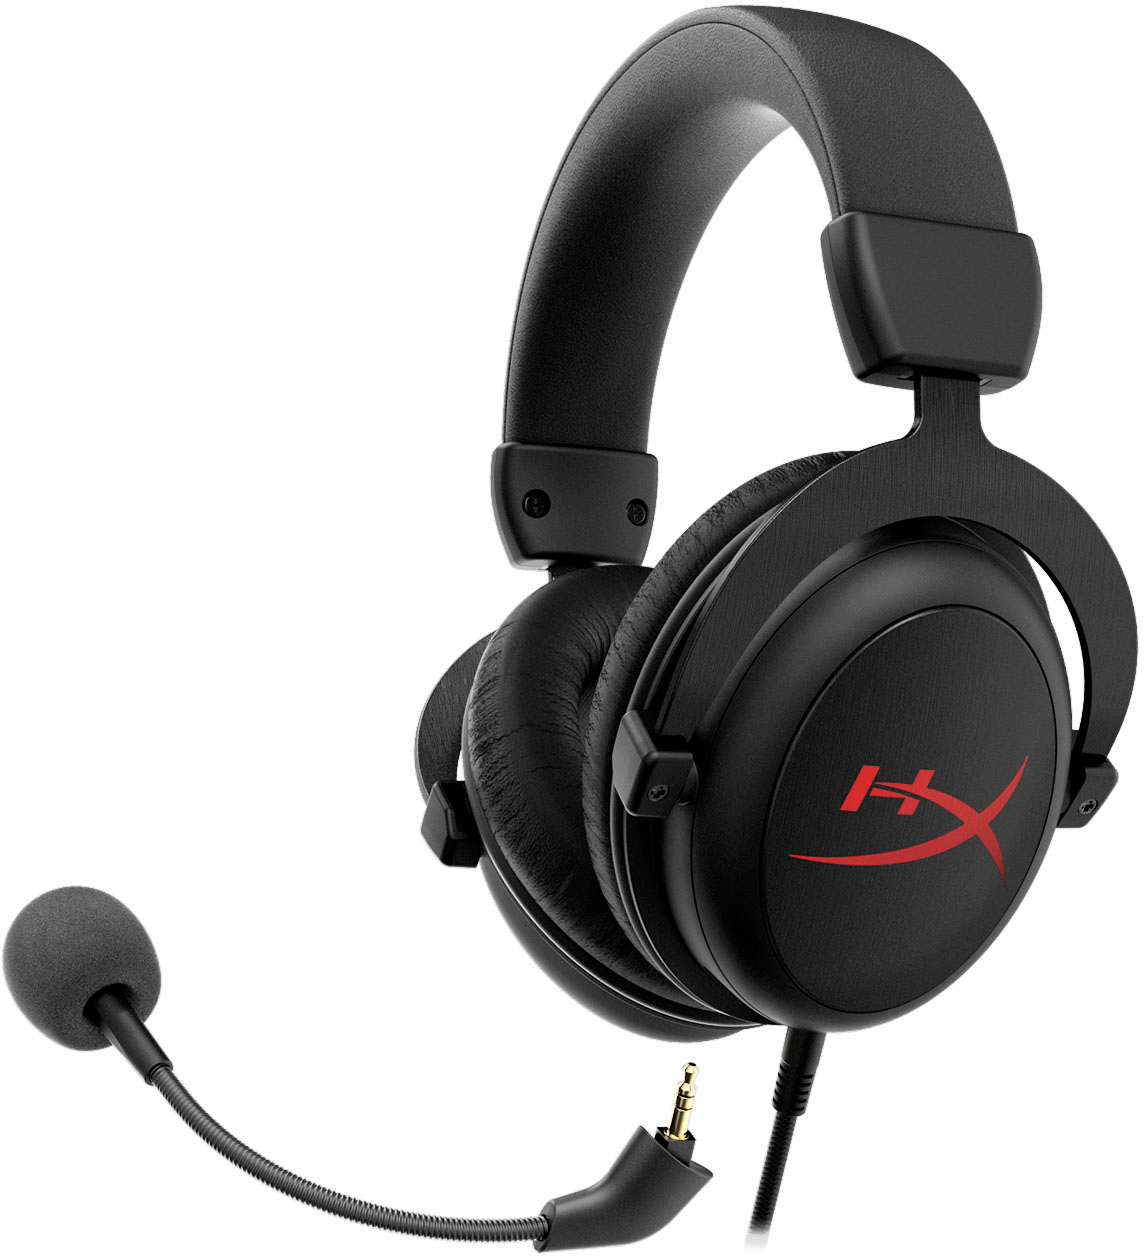 Angle View: HyperX - SoloCast Wired USB Condensor Microphone and Cloud Core Wired 7.1 Surround Sound Gaming Headset - Streamer Starter Pack